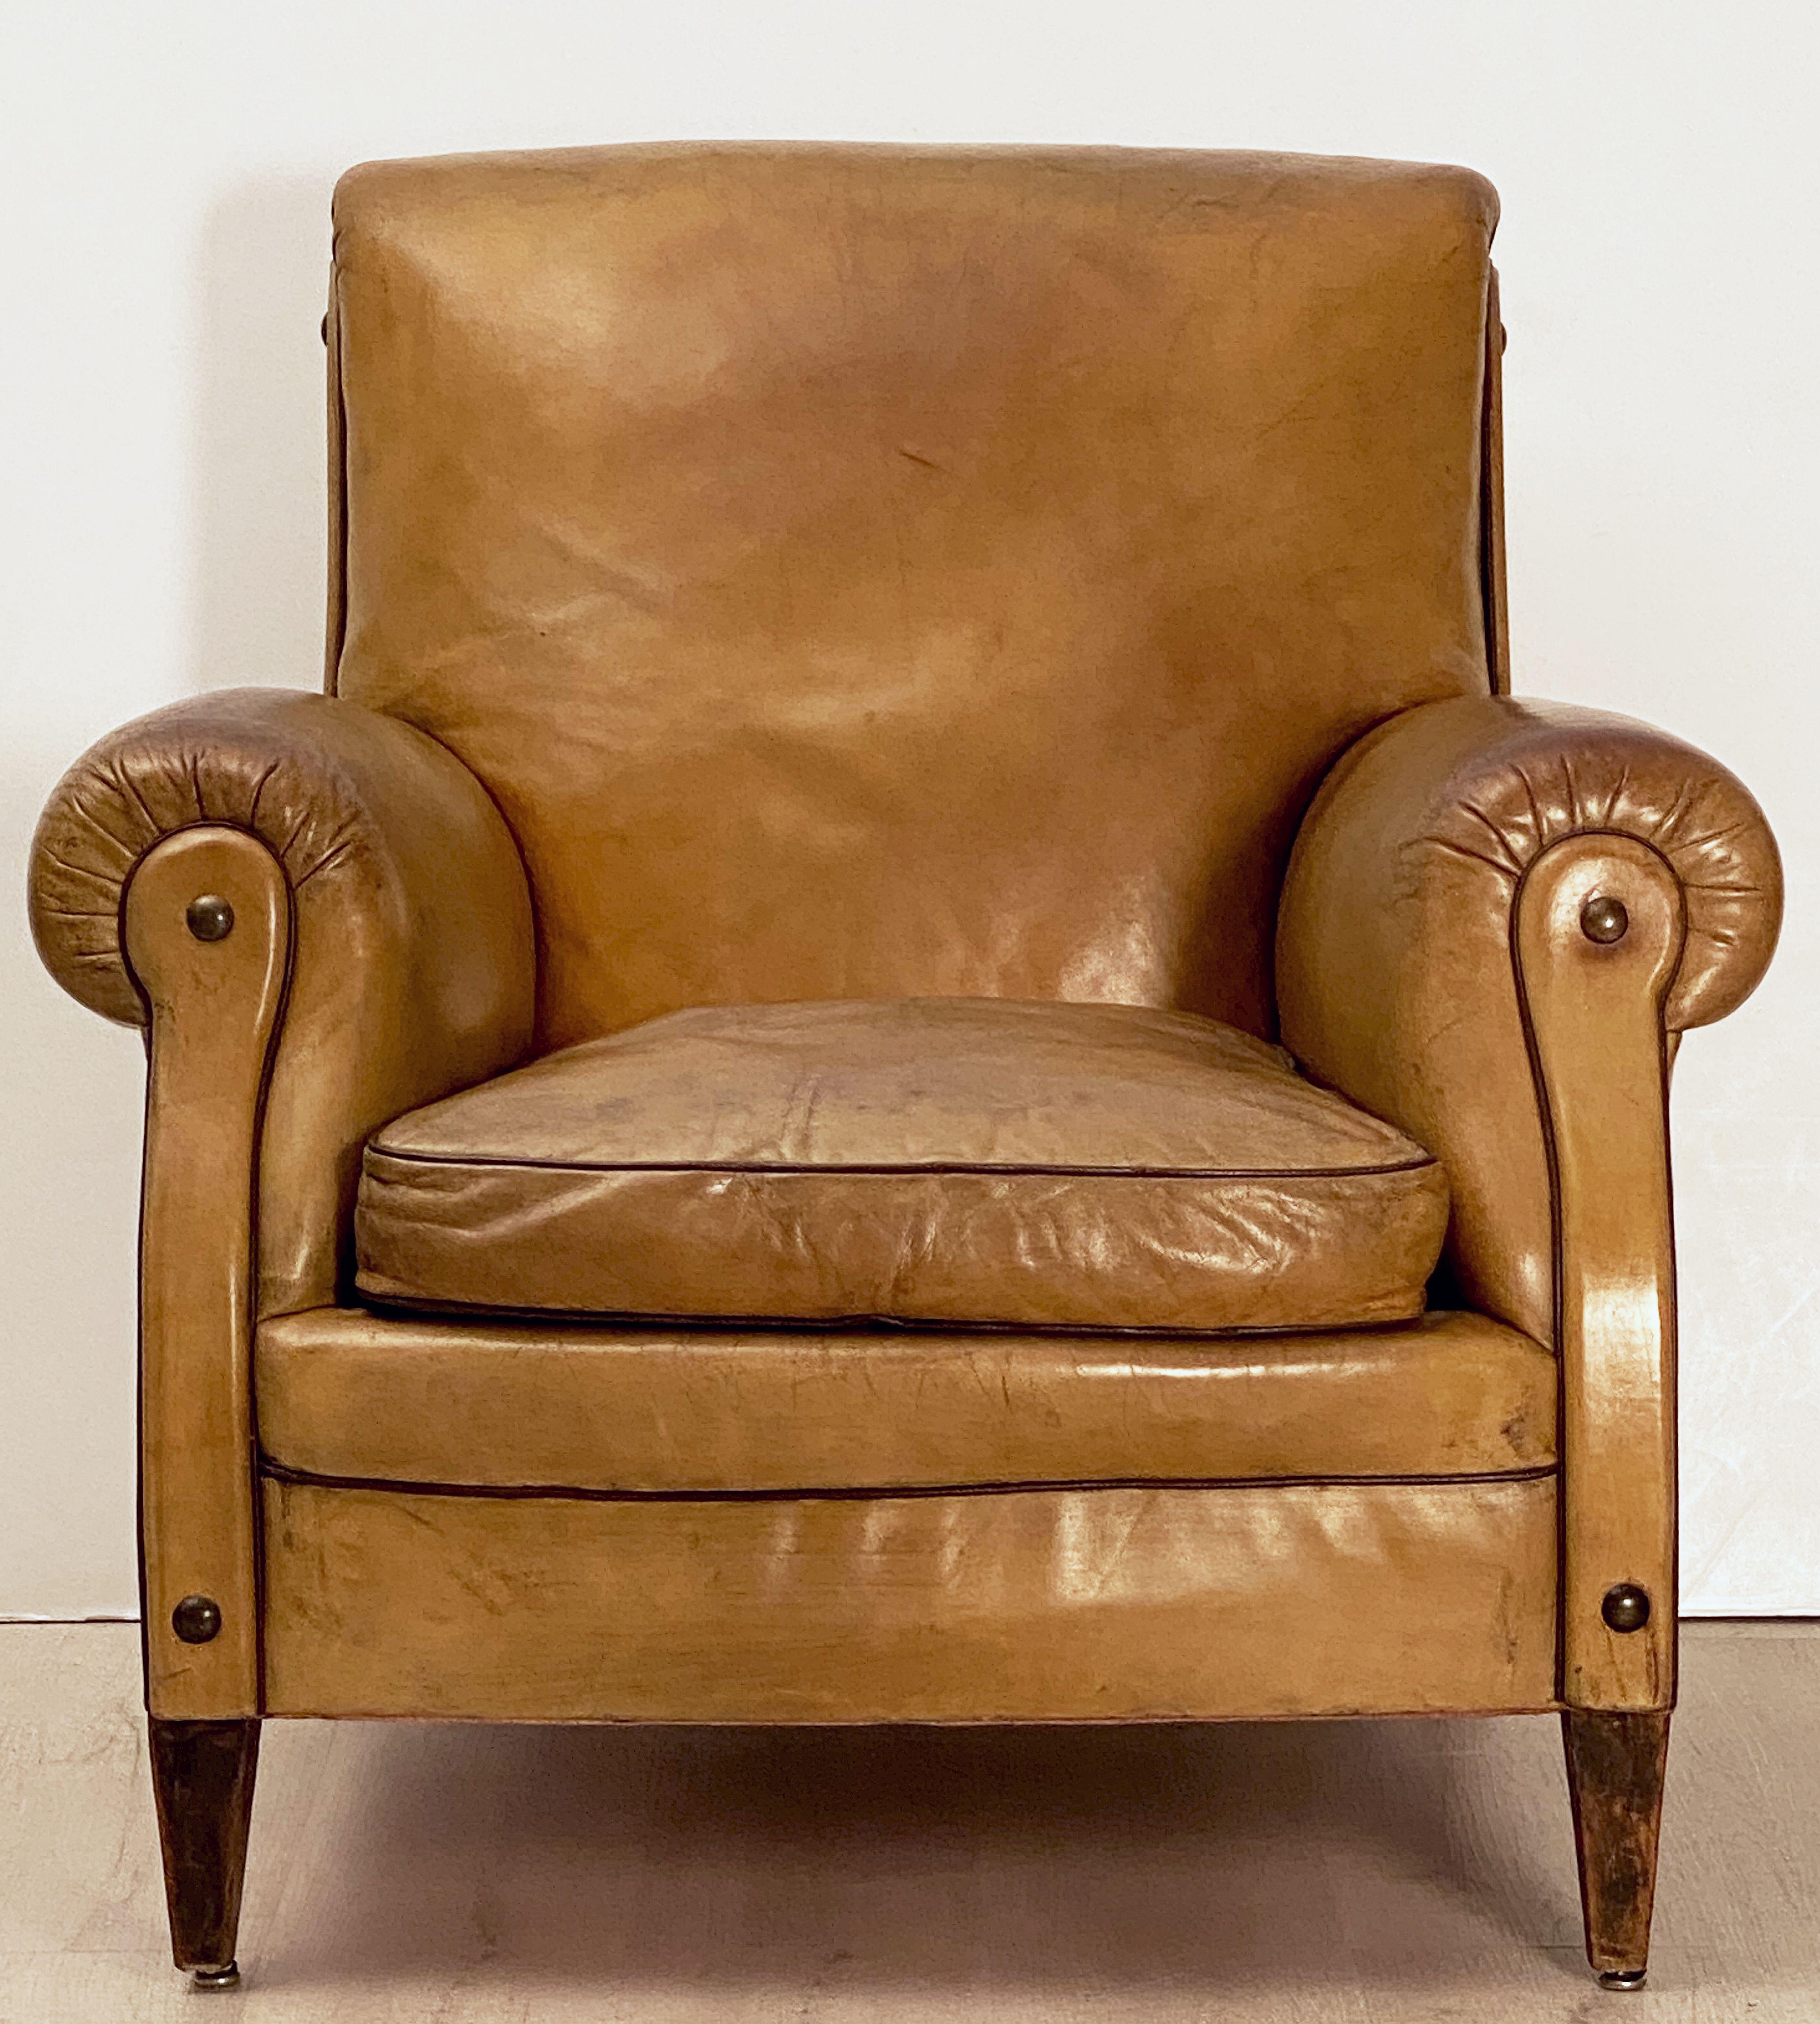 A handsome vintage Dutch leather upholstered club or lounge chair from the Art Deco era, featuring a comfortable back and seat with removable cushion, with stylish arms and original leather, button accents, brass nail-head trim to back, and resting